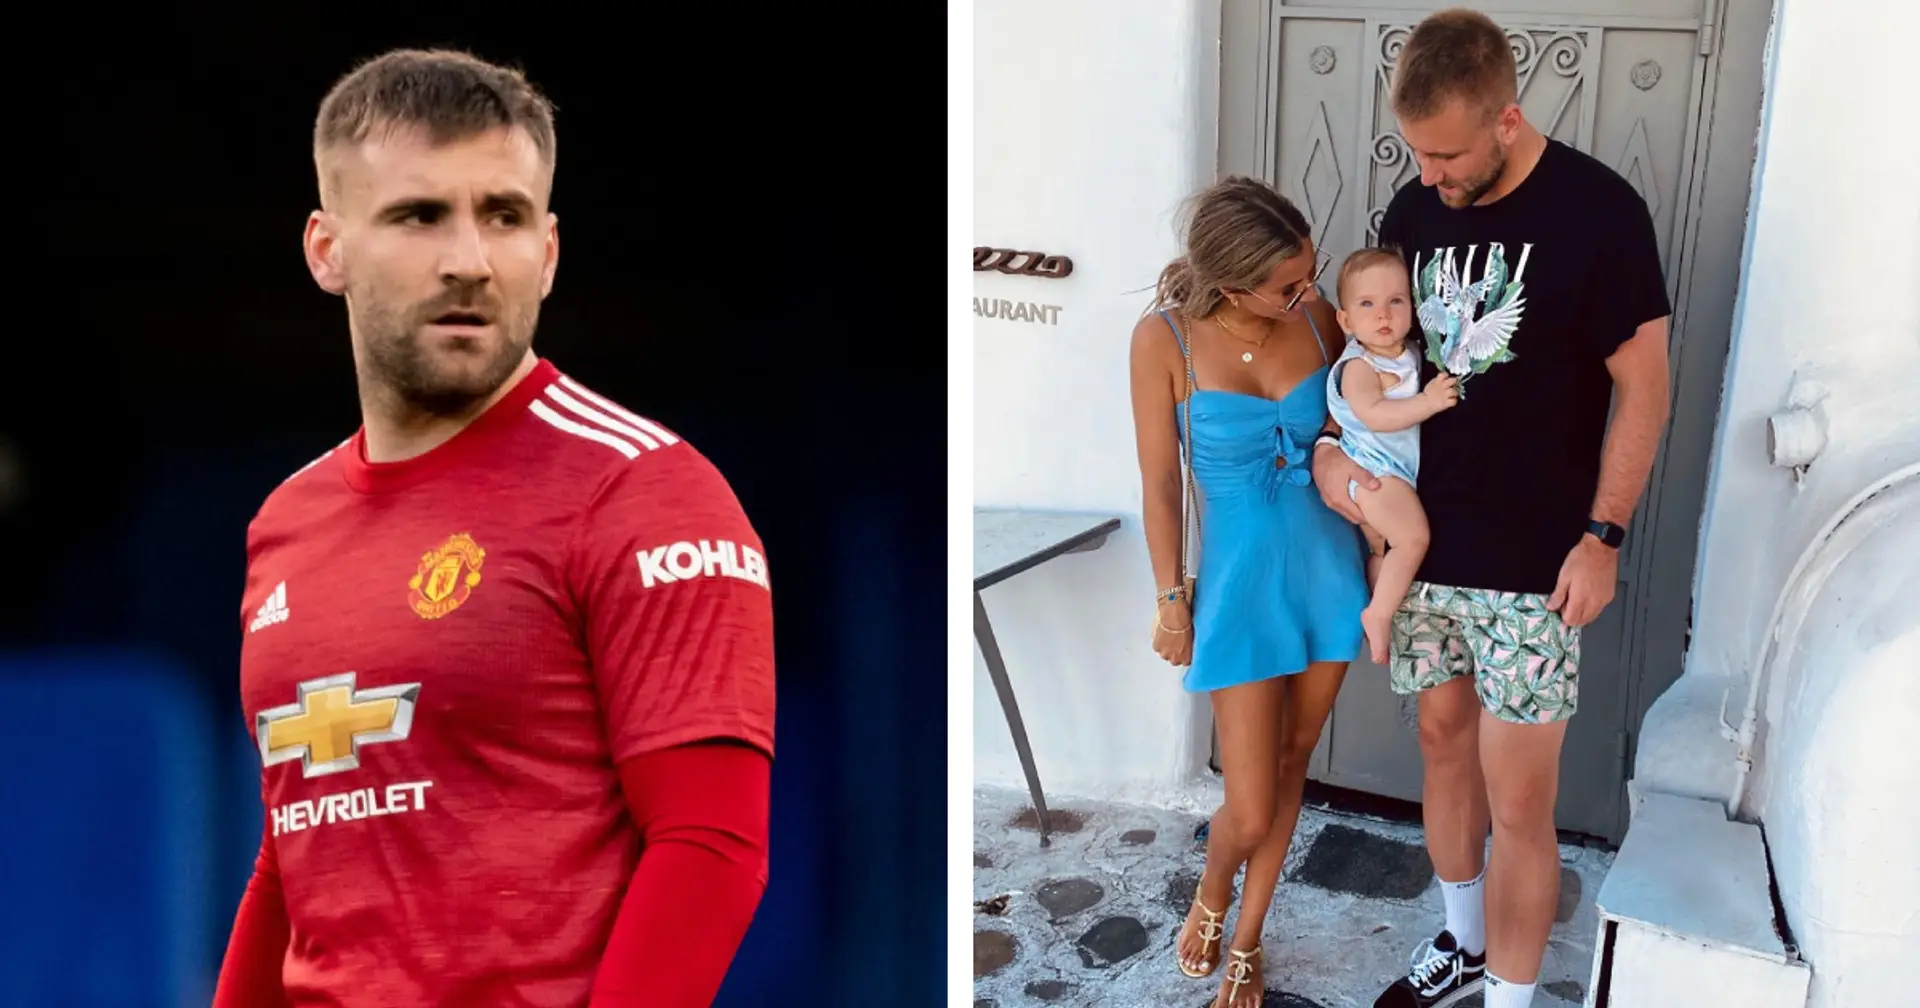 'Every day is different': Luke Shaw opens up on how becoming a dad changed his life